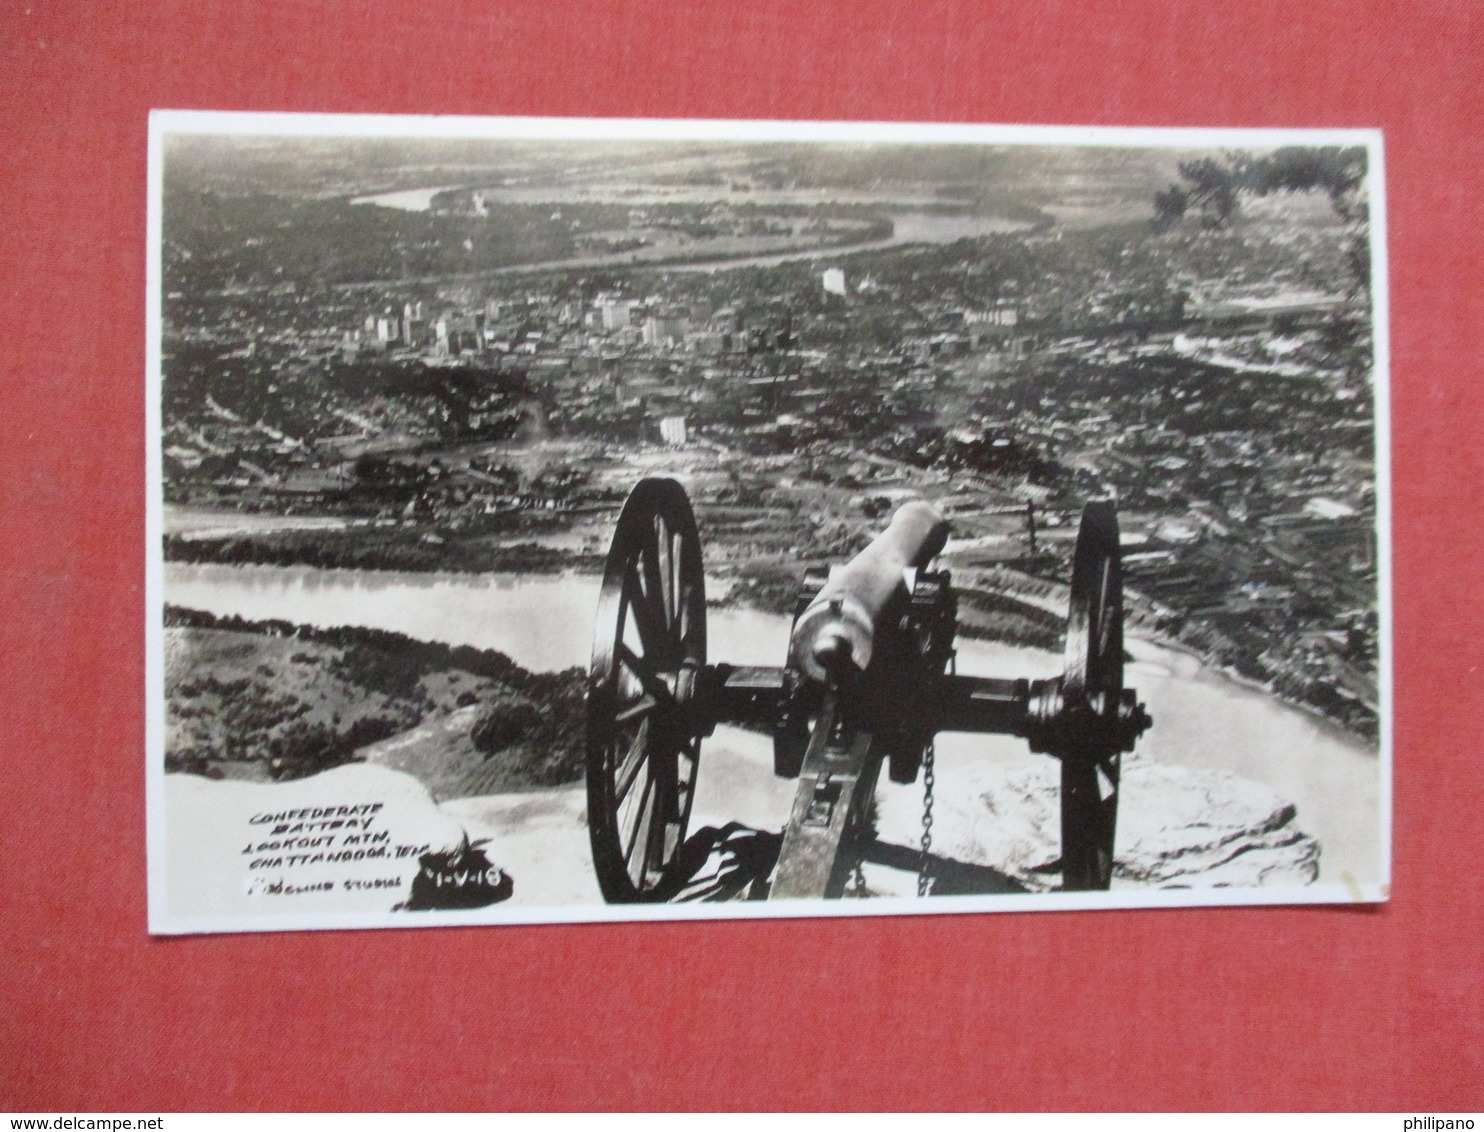 RPPC   Confederate Battery Lookout Mountain   - Tennessee > Chattanooga    Ref 4105 - Chattanooga